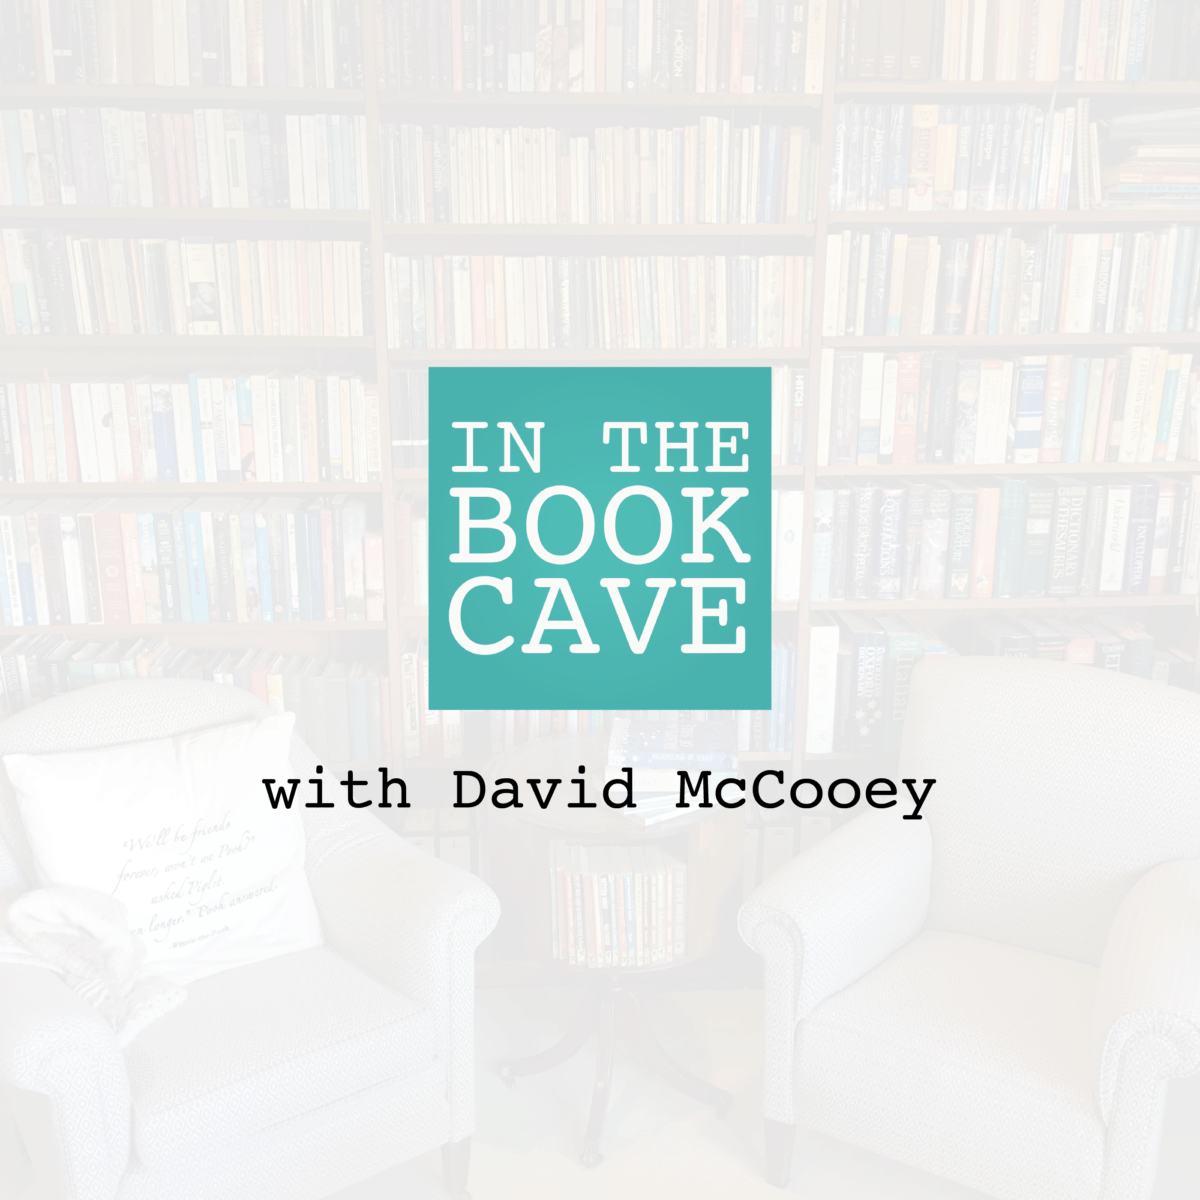 In the Book Cave with David McCooey